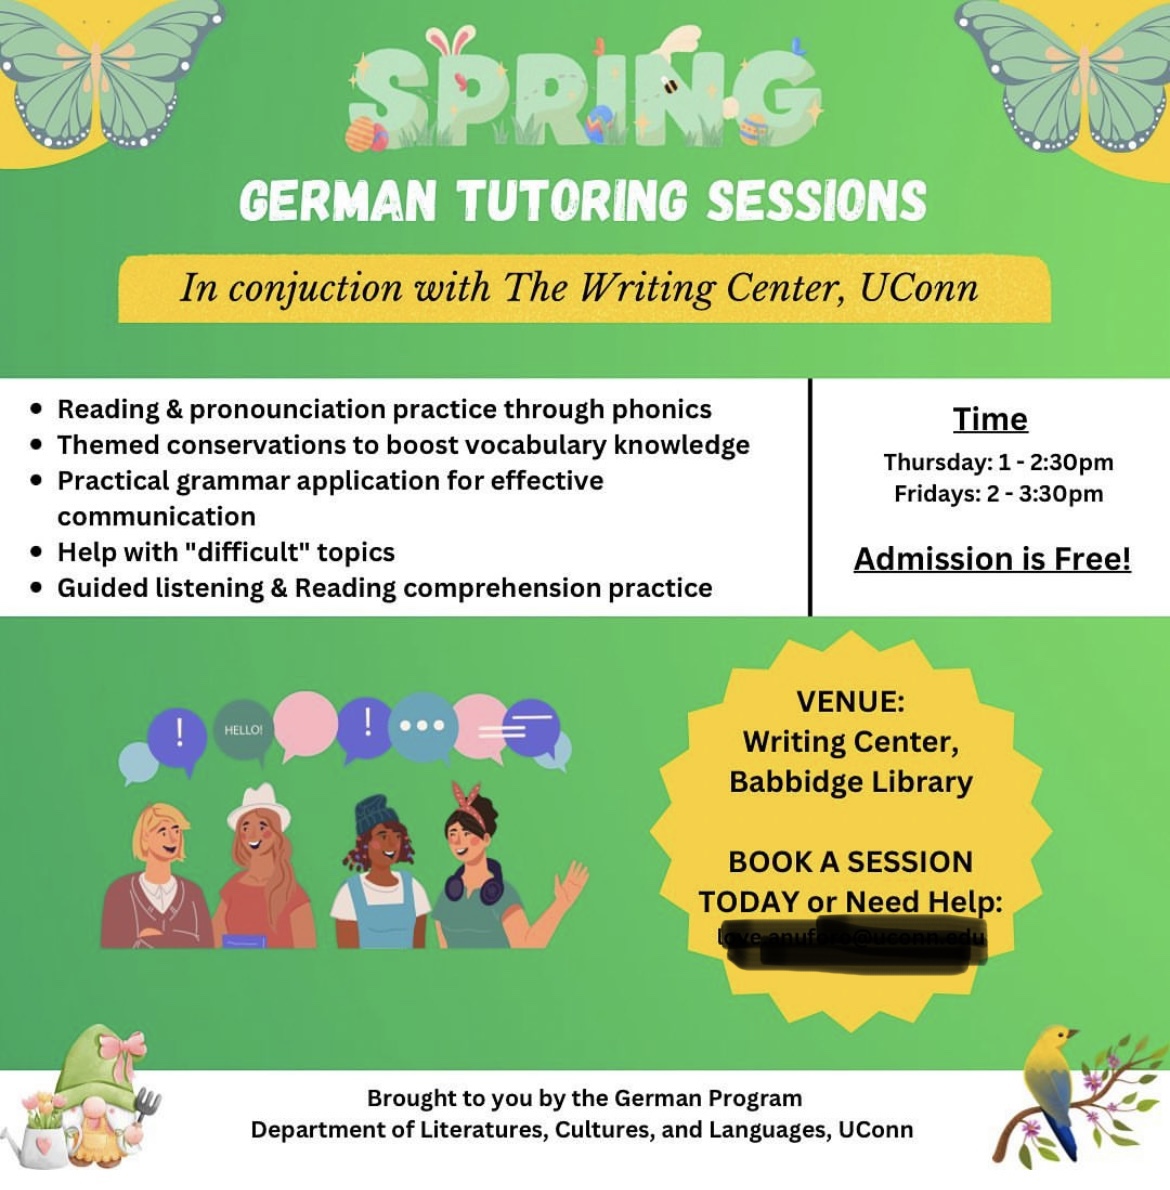 Copy of a green flyer encouraging students to attend German language tutoring in the writing center.